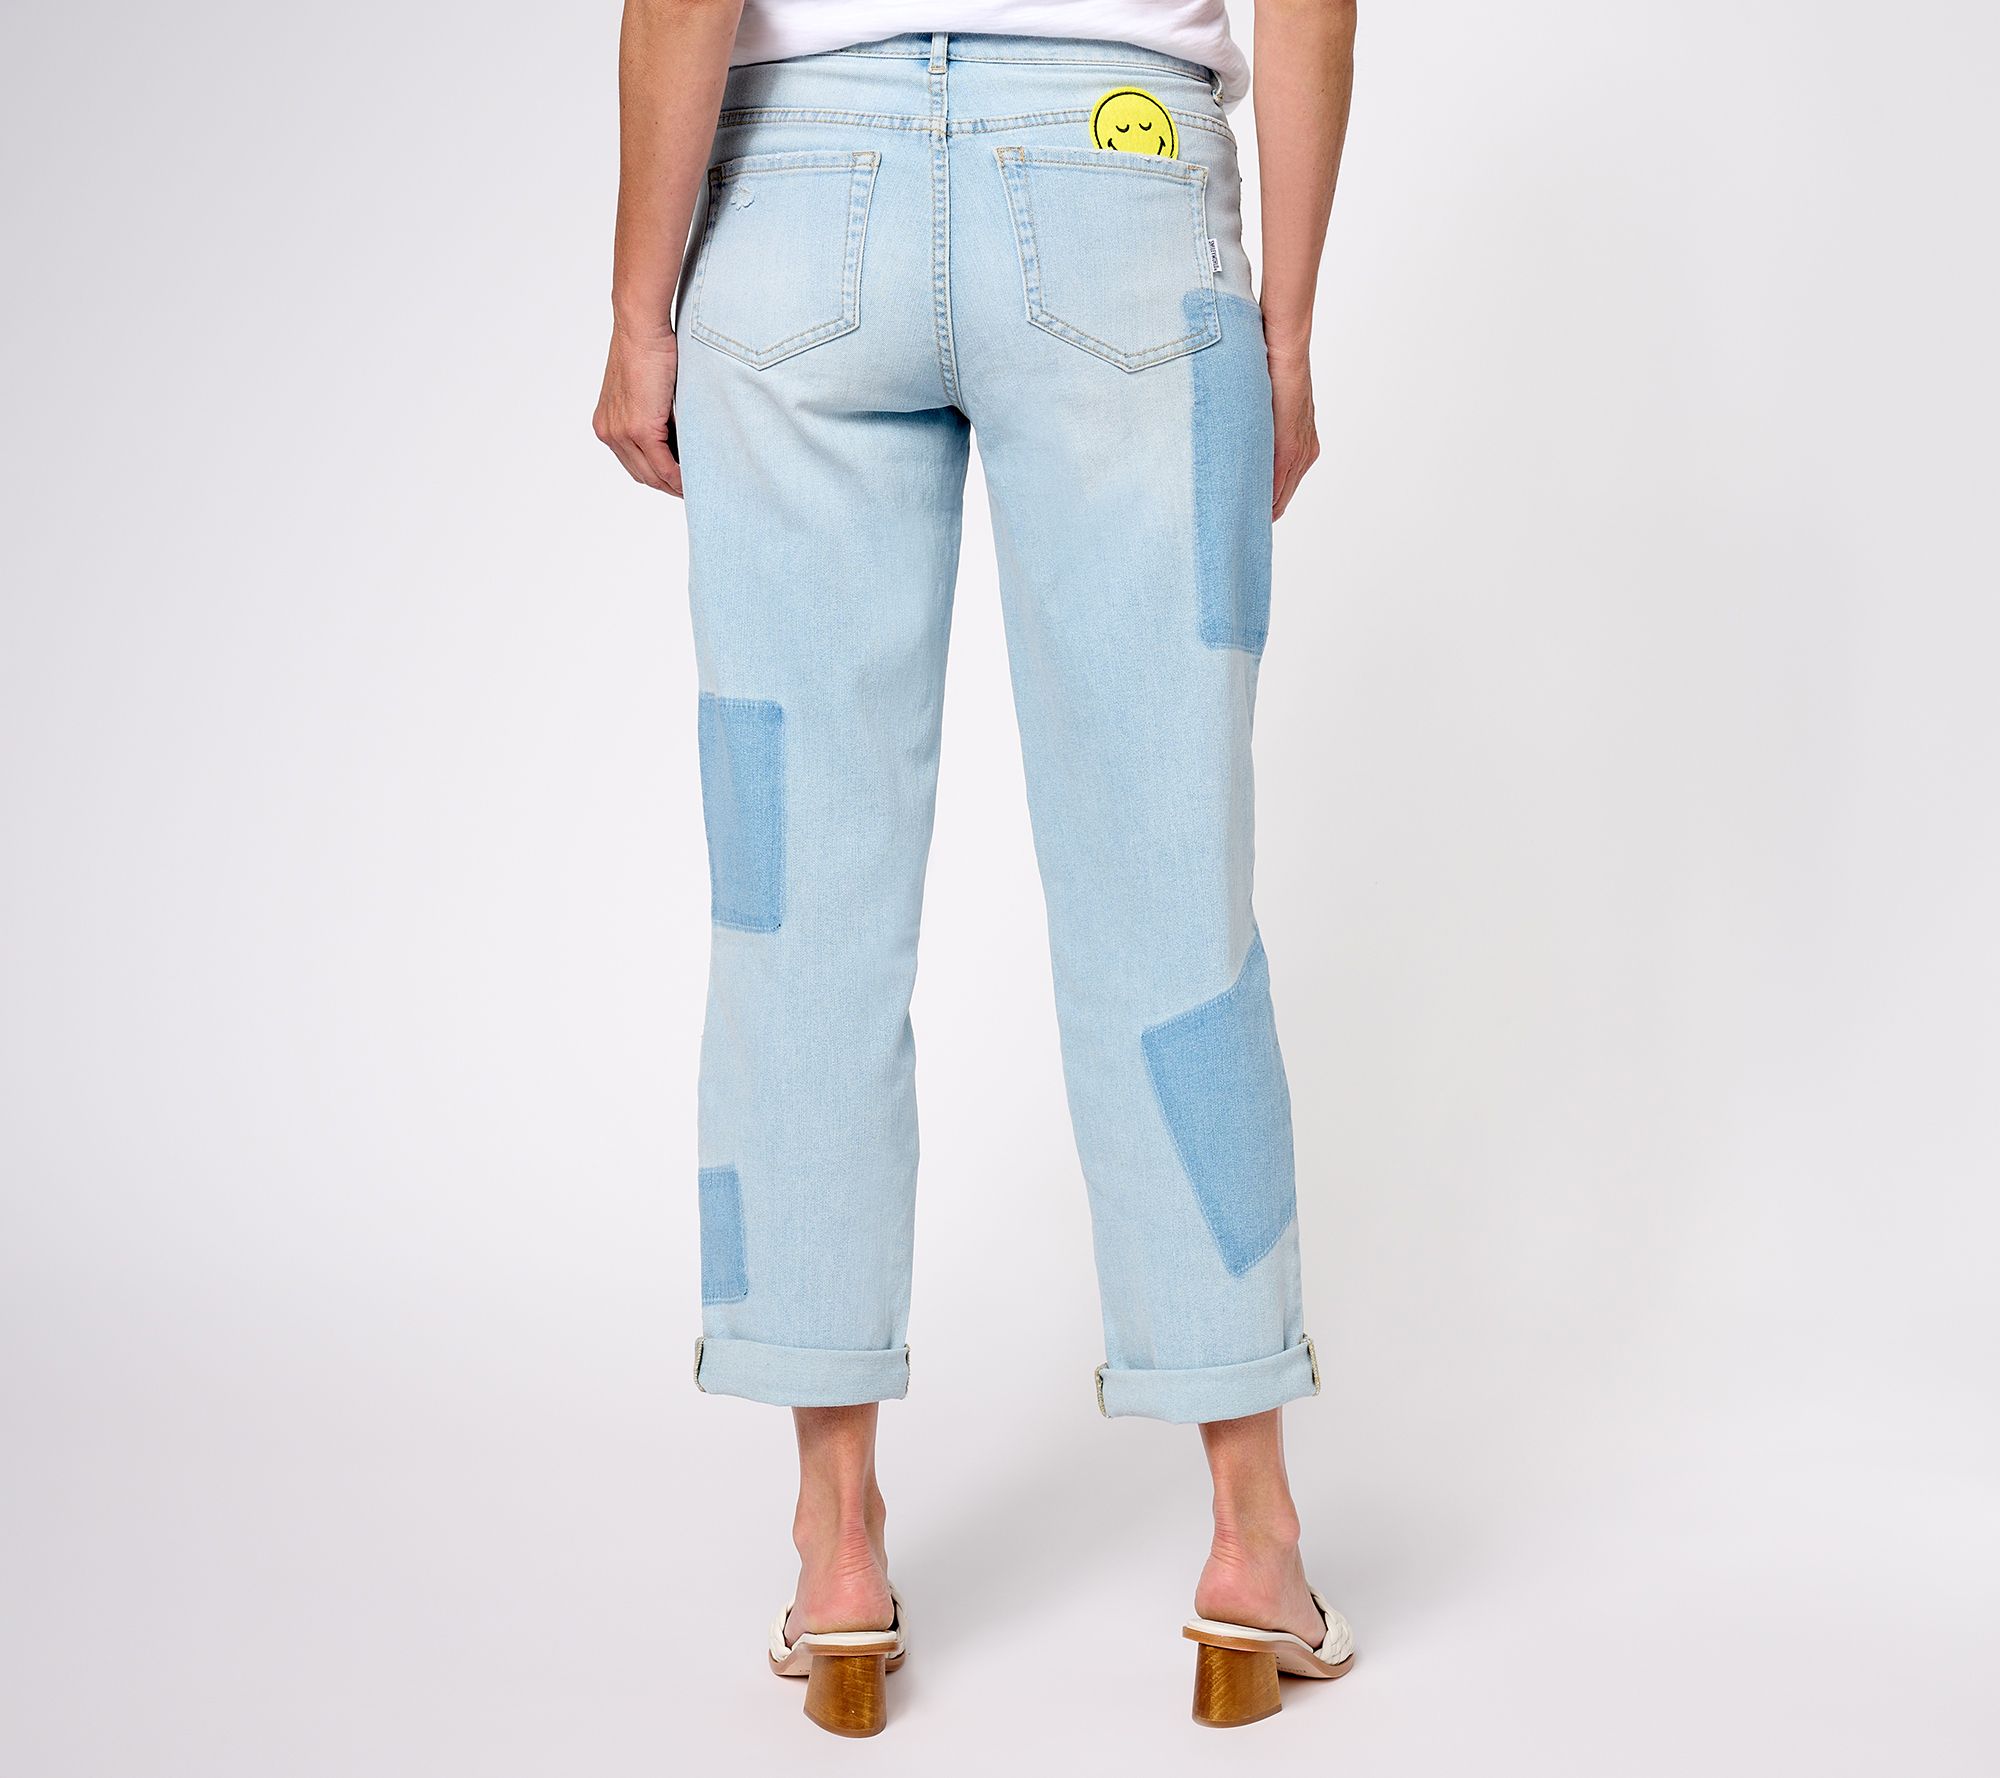 LOGO by Lori Goldstein x Smiley World Special Edition Regular Jeans ...